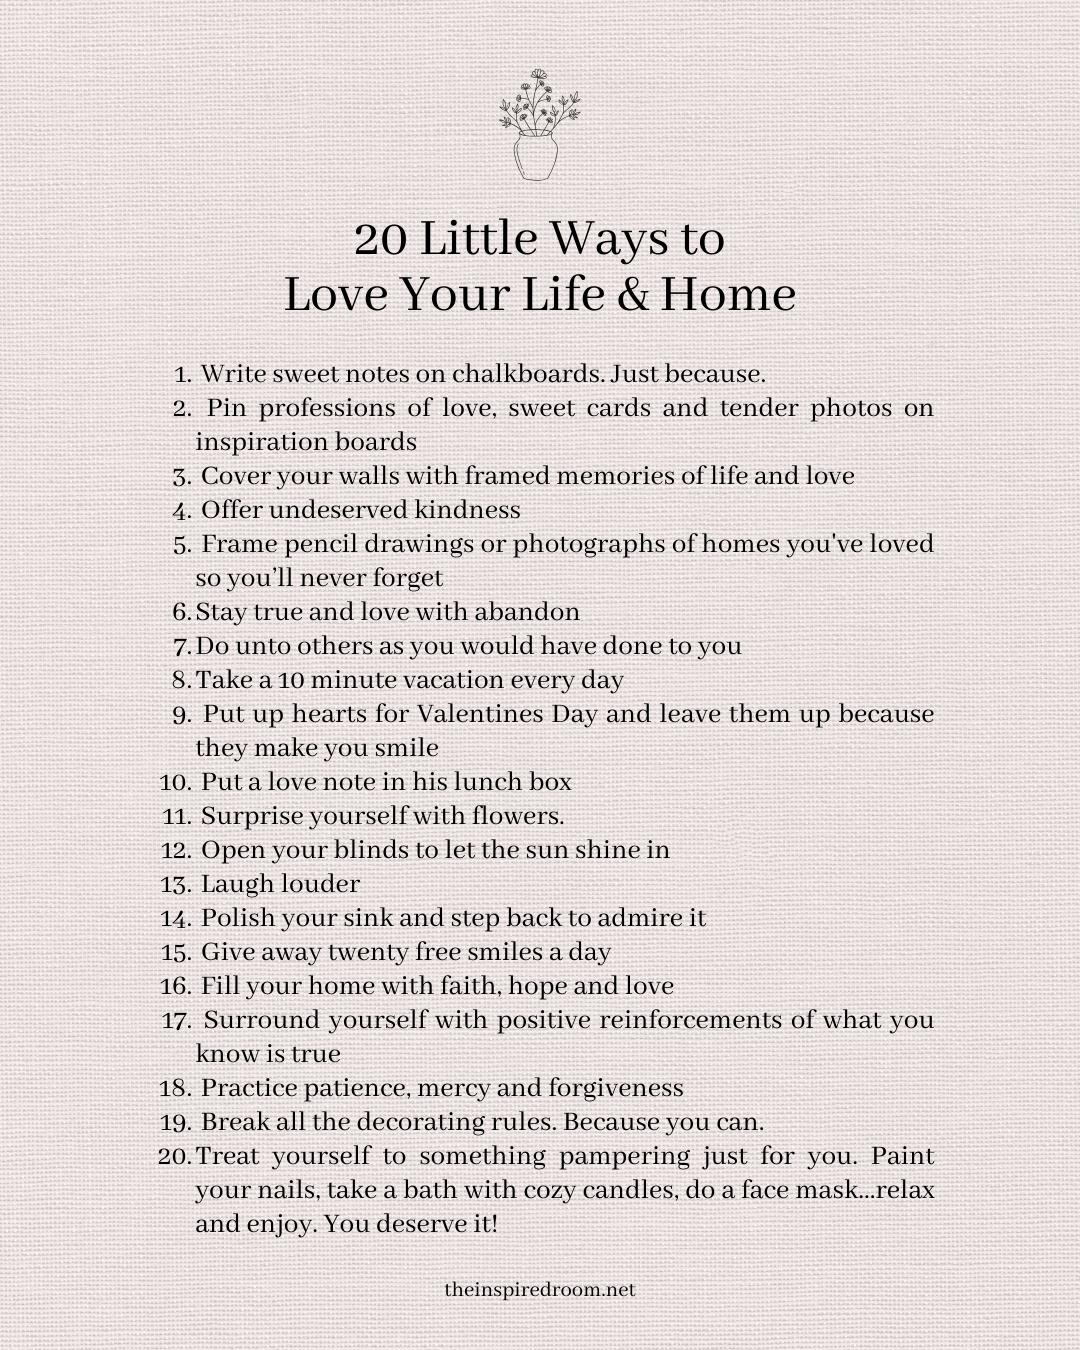 20 Little Ways to Love Your Life & Home